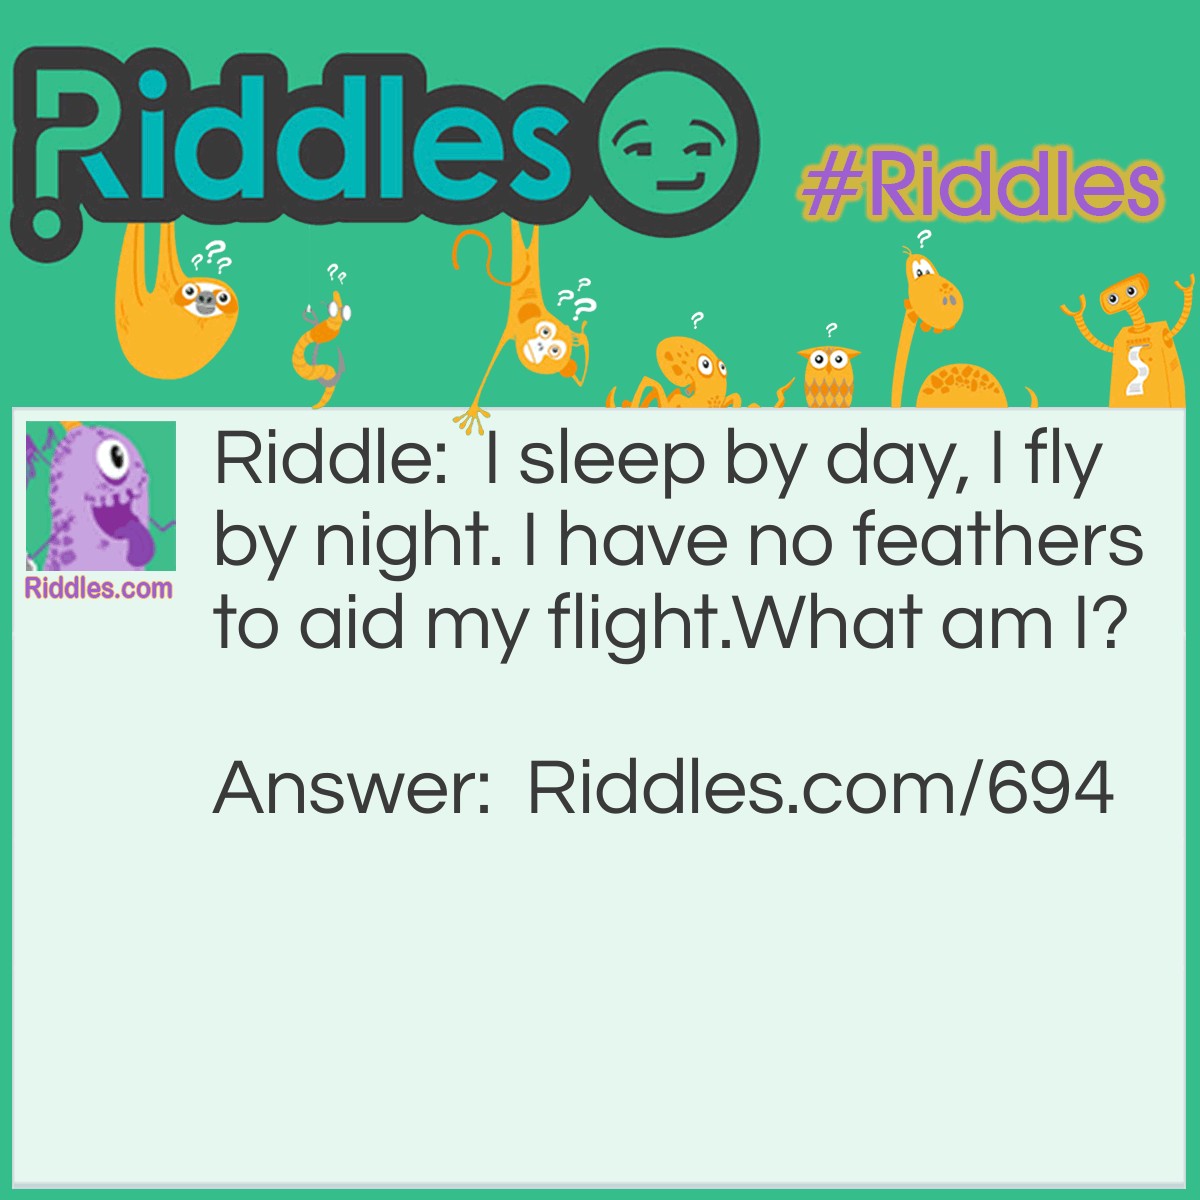 Riddle: I sleep by day, I fly by night. I have no feathers to aid my flight.
What am I? Answer: I am a Bat.